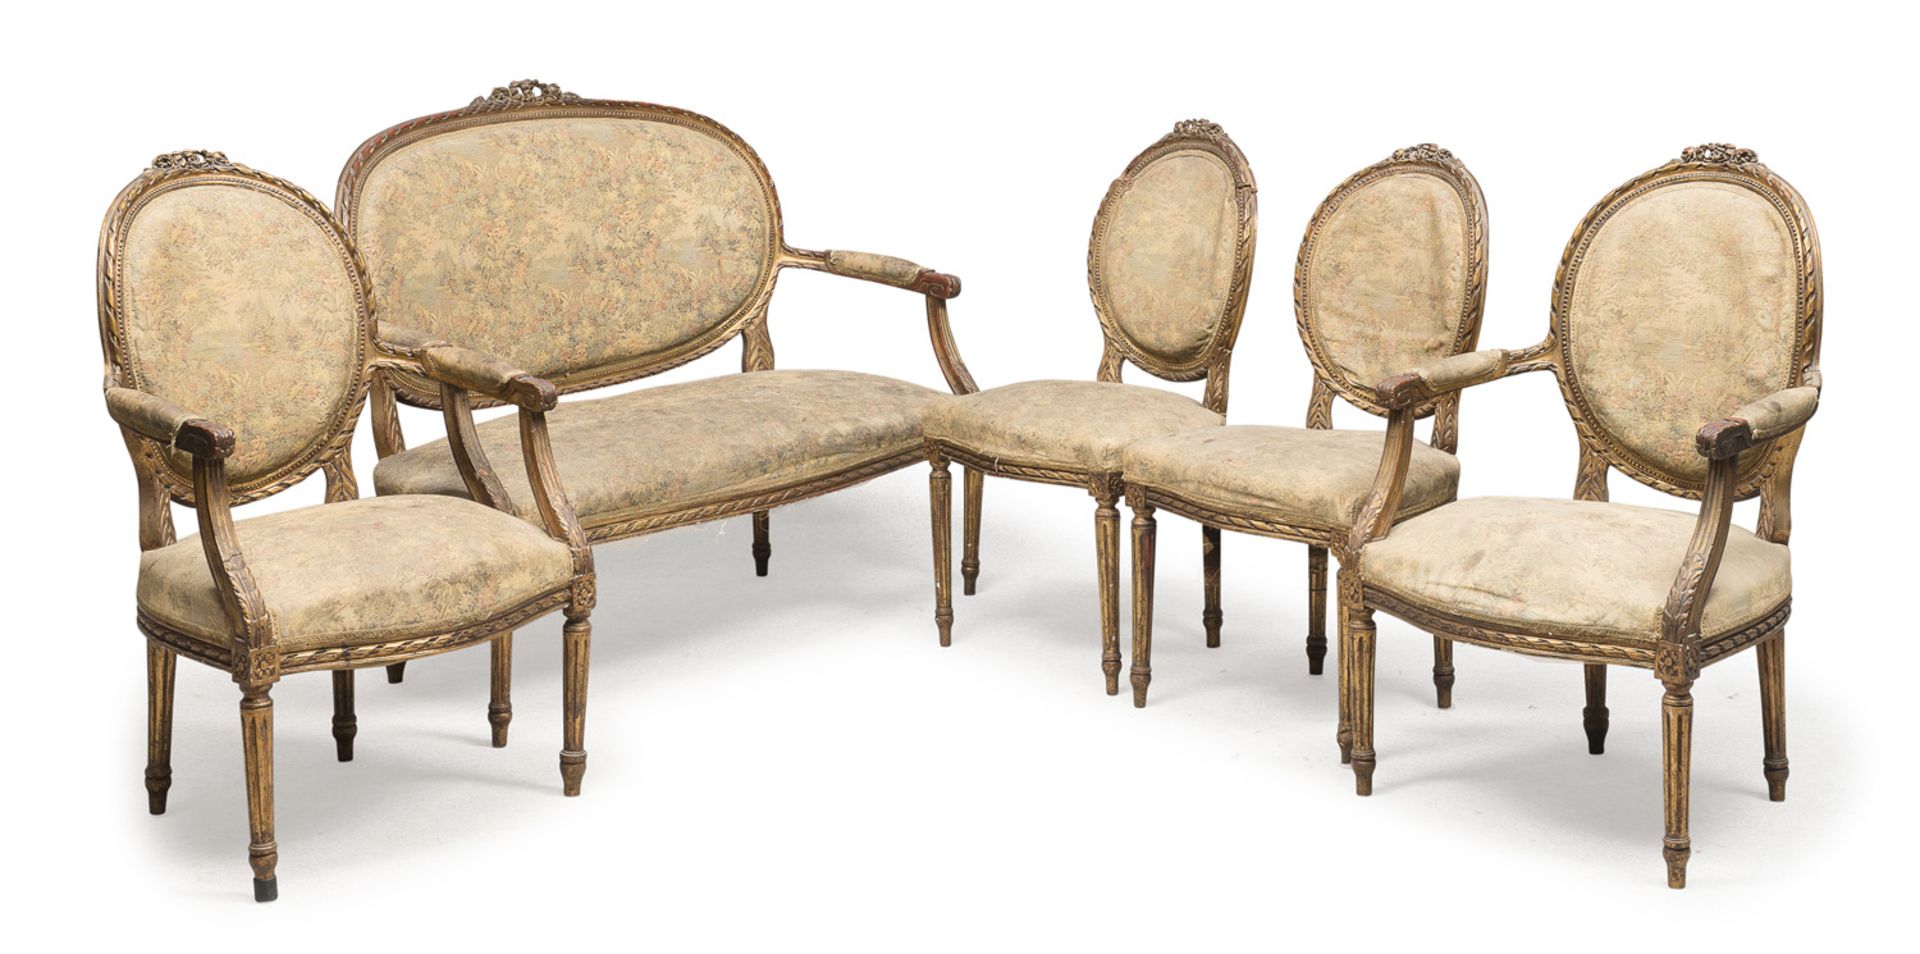 LIVING ROOM SET IN GILTWOOD LATE 19TH CENTURY